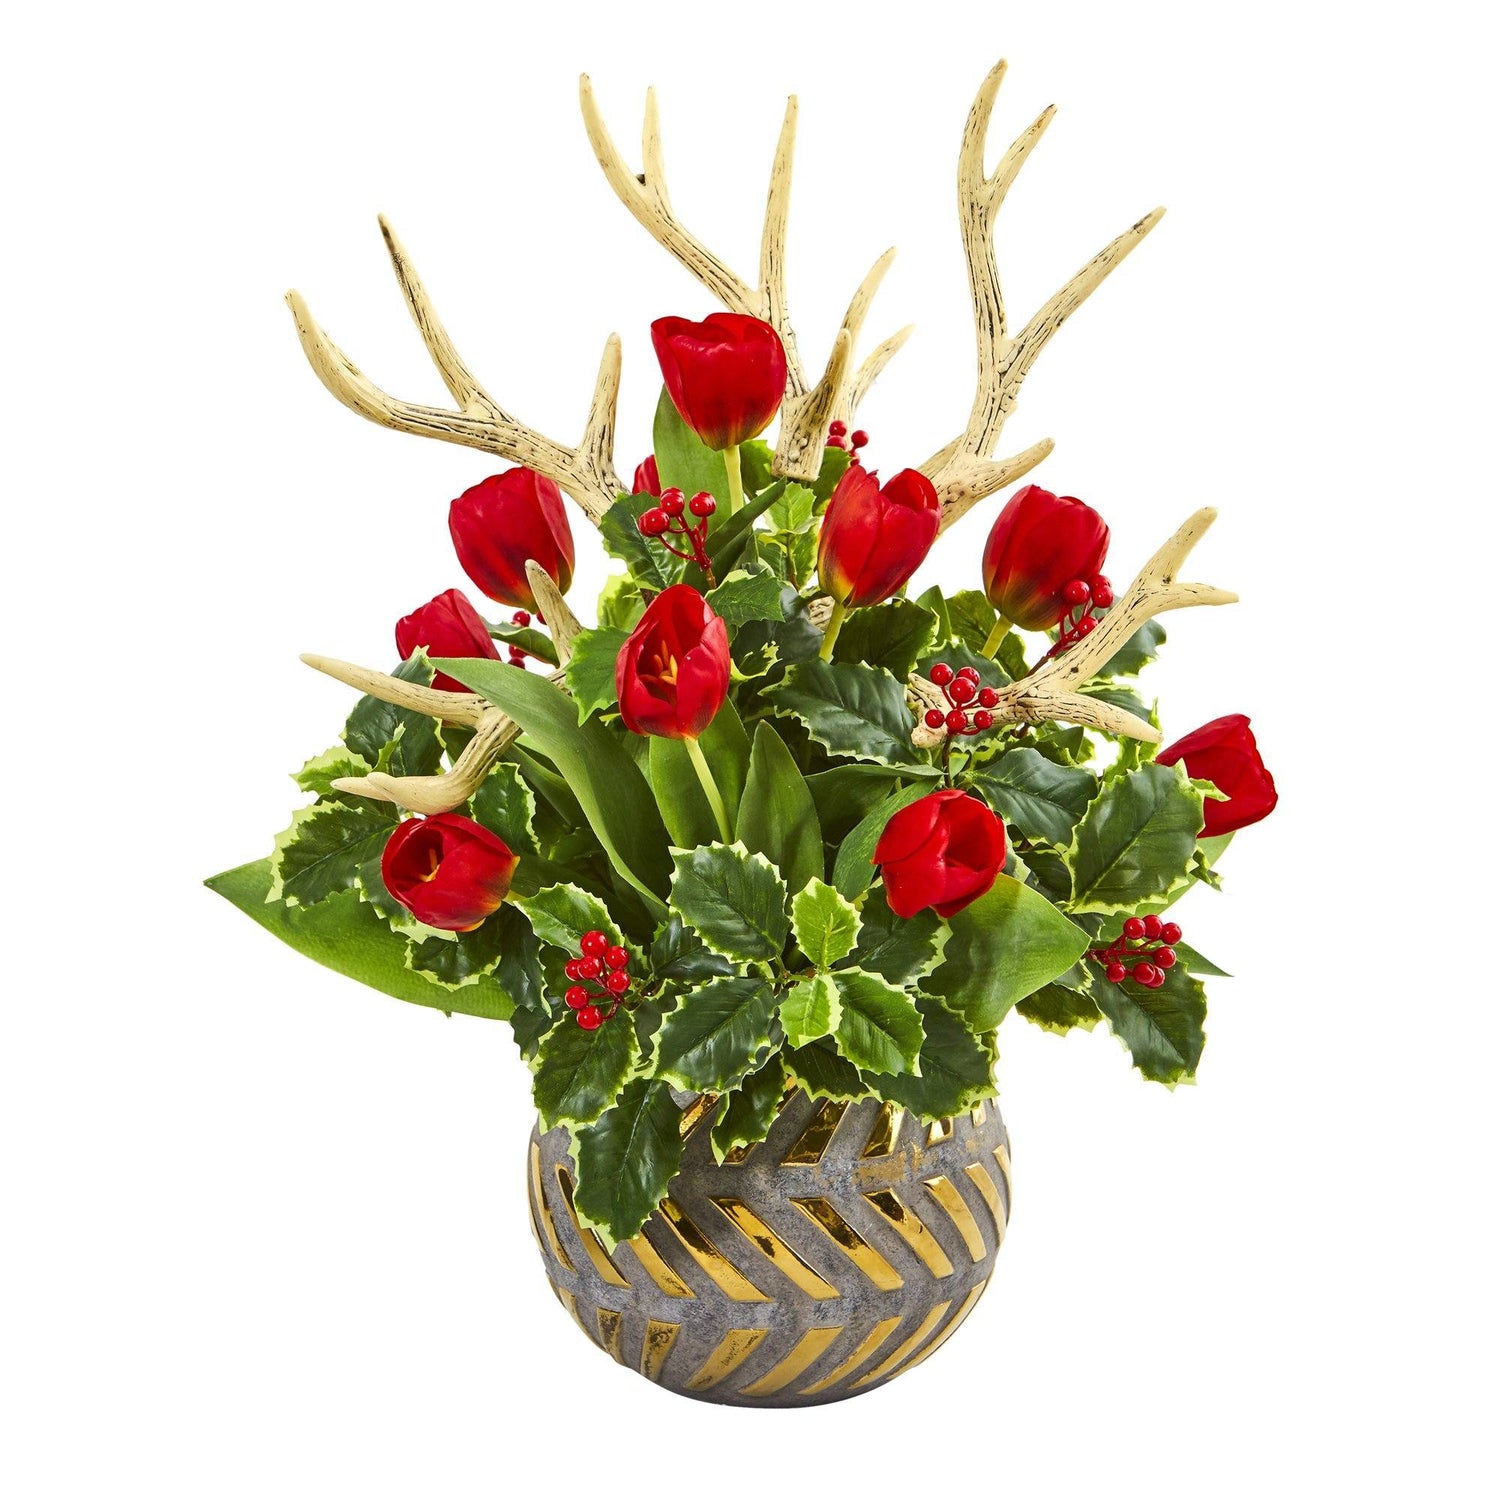 23” Tulips, Antlers and Holly Leaf Arrangement in Bowl